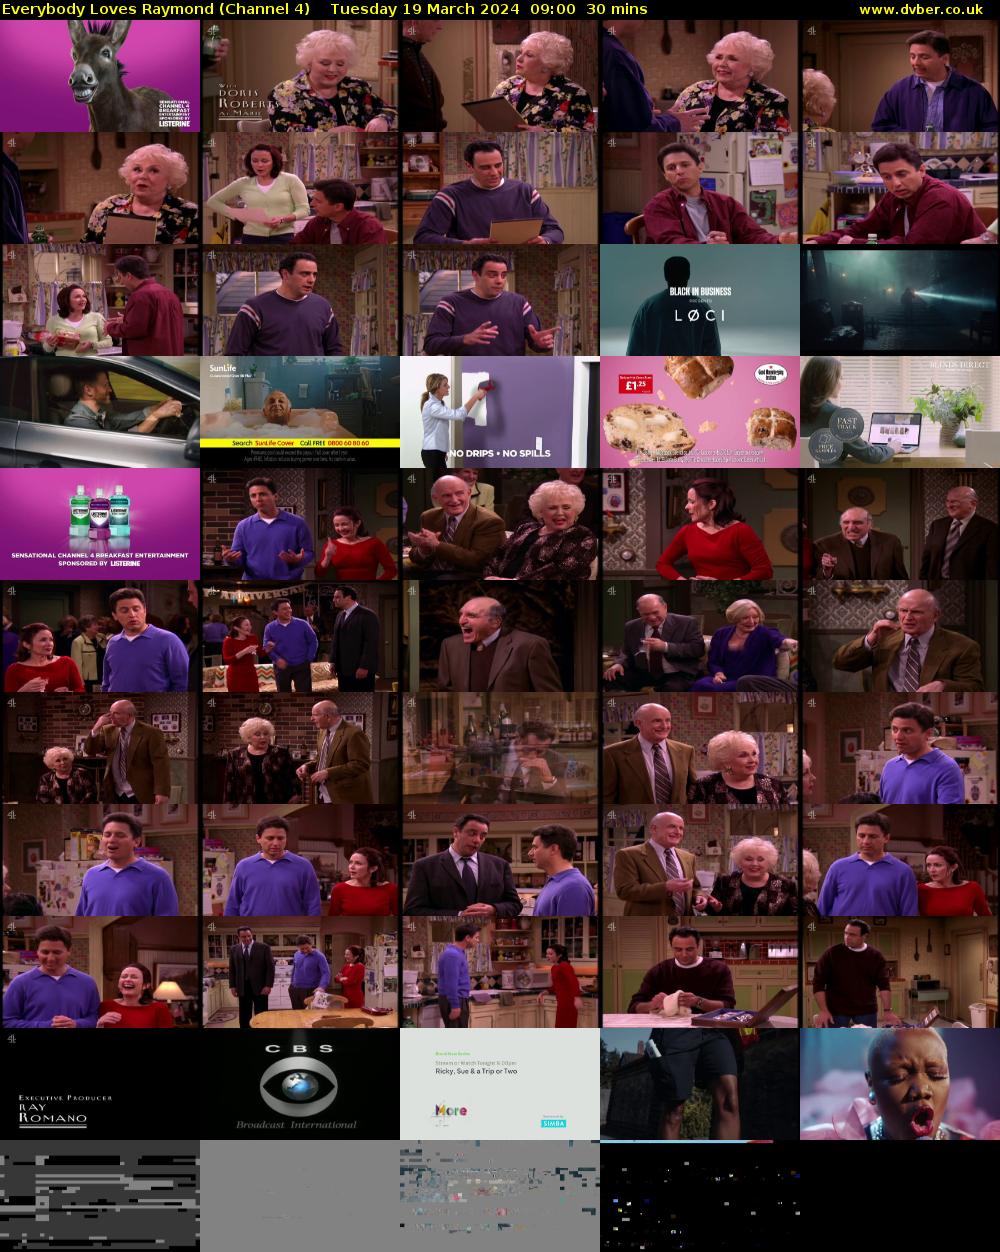 Everybody Loves Raymond (Channel 4) Tuesday 19 March 2024 09:00 - 09:30